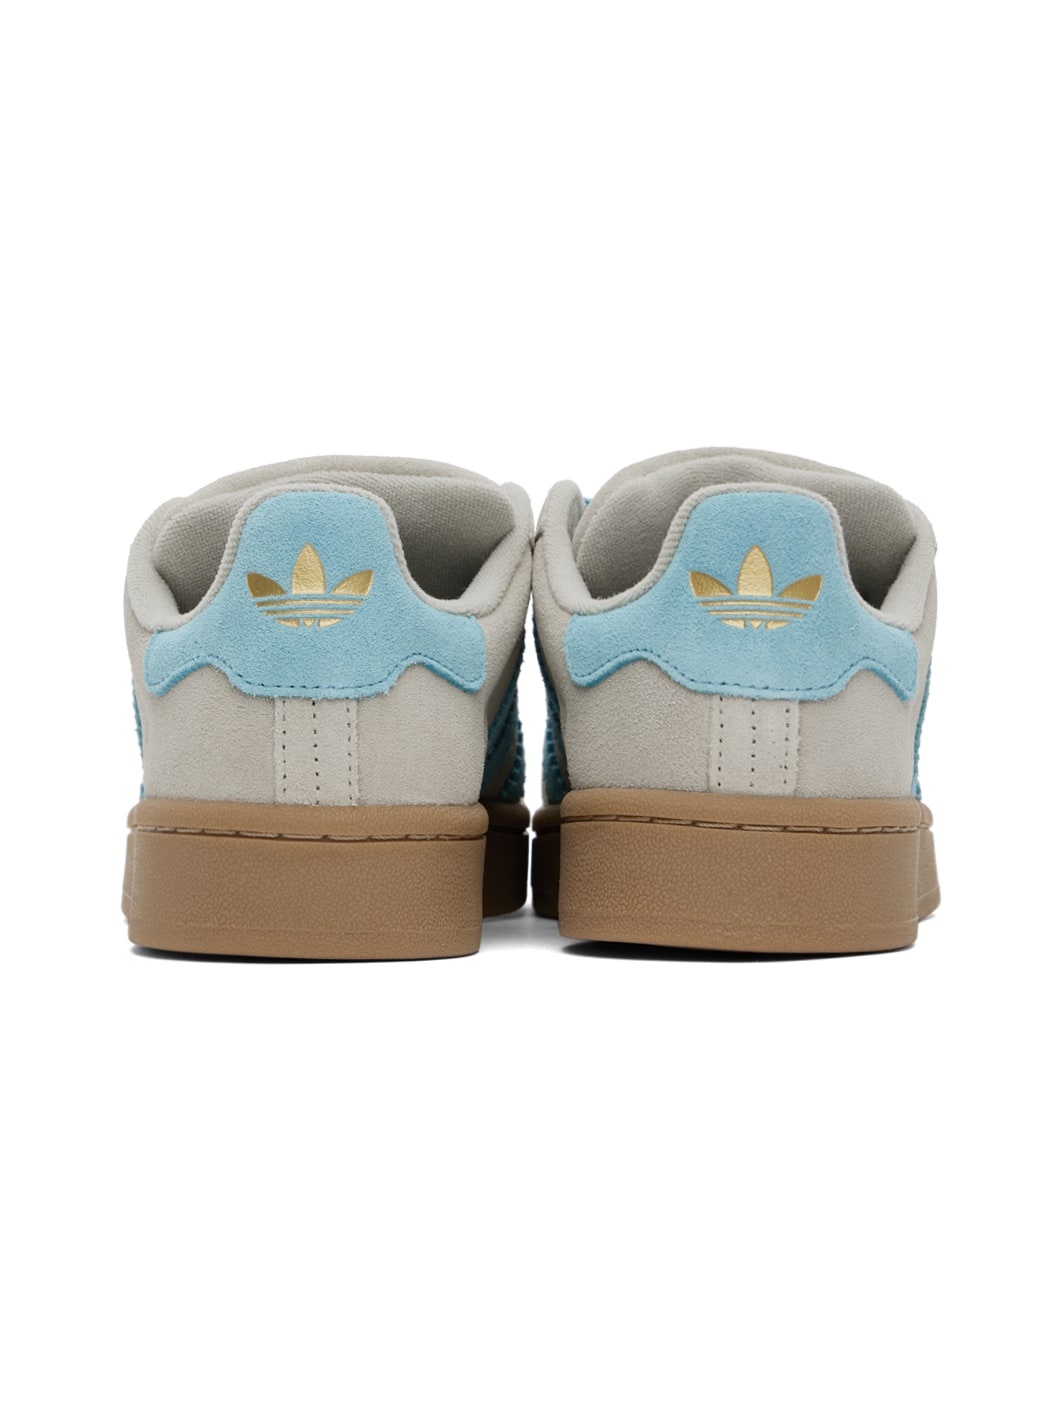 Gray & Blue Campus 00s Sneakers - 2